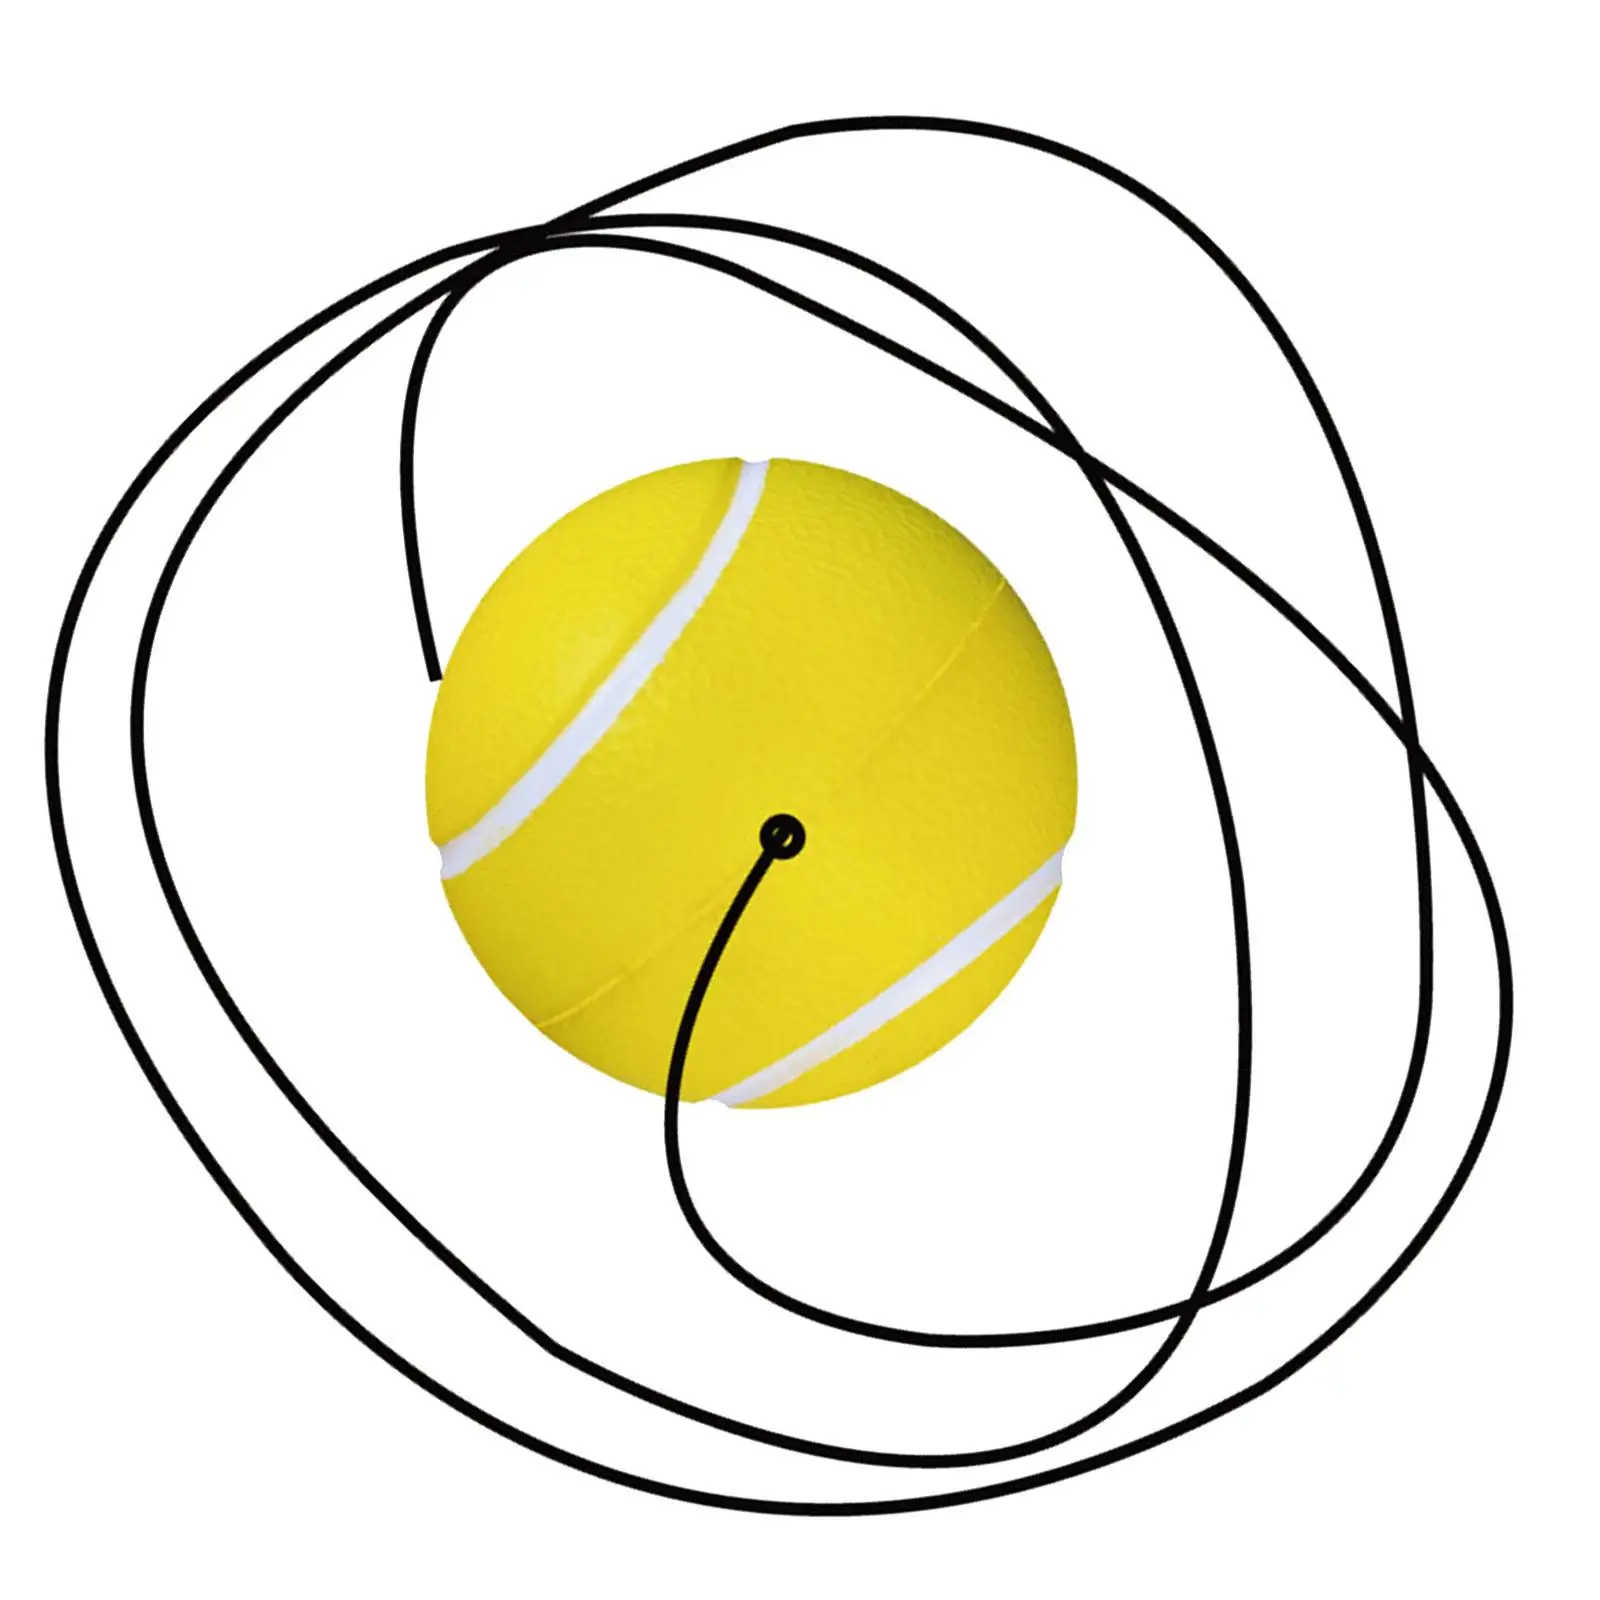 Tennis Ball with String Ball for Tennis Training Beginners